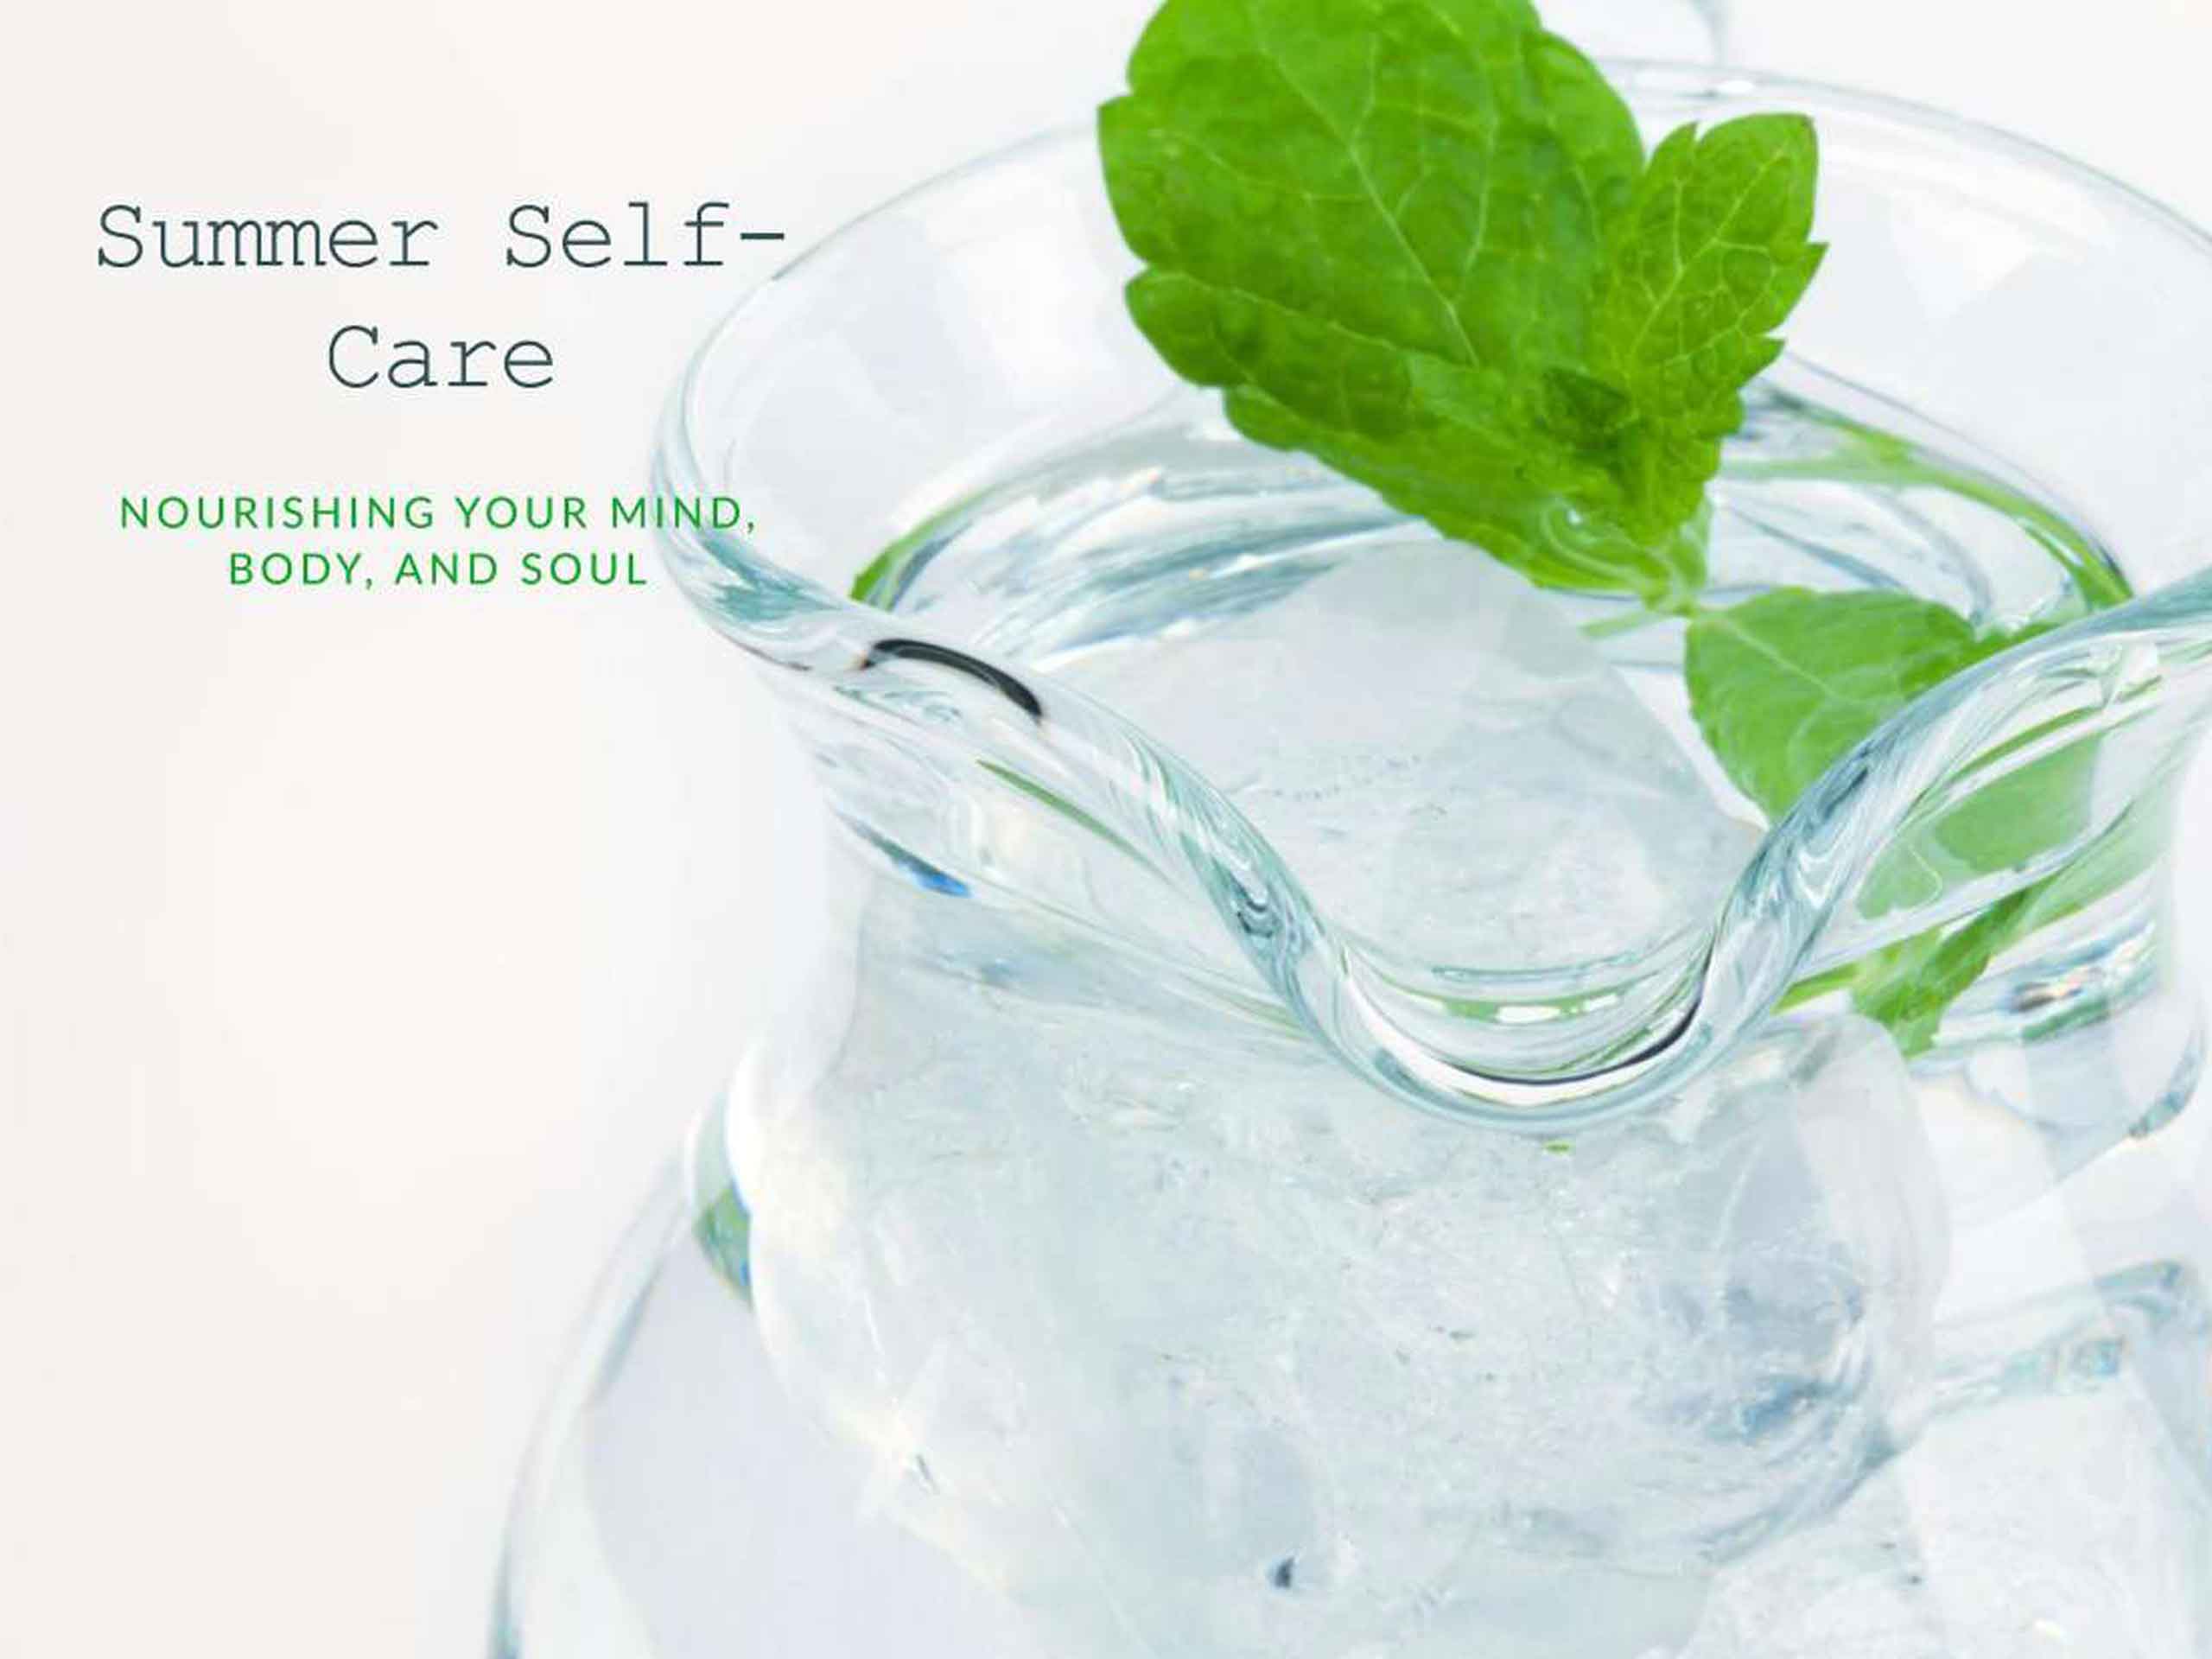 Summer Self-Care: Nourishing Your Mind, Body, and Soul